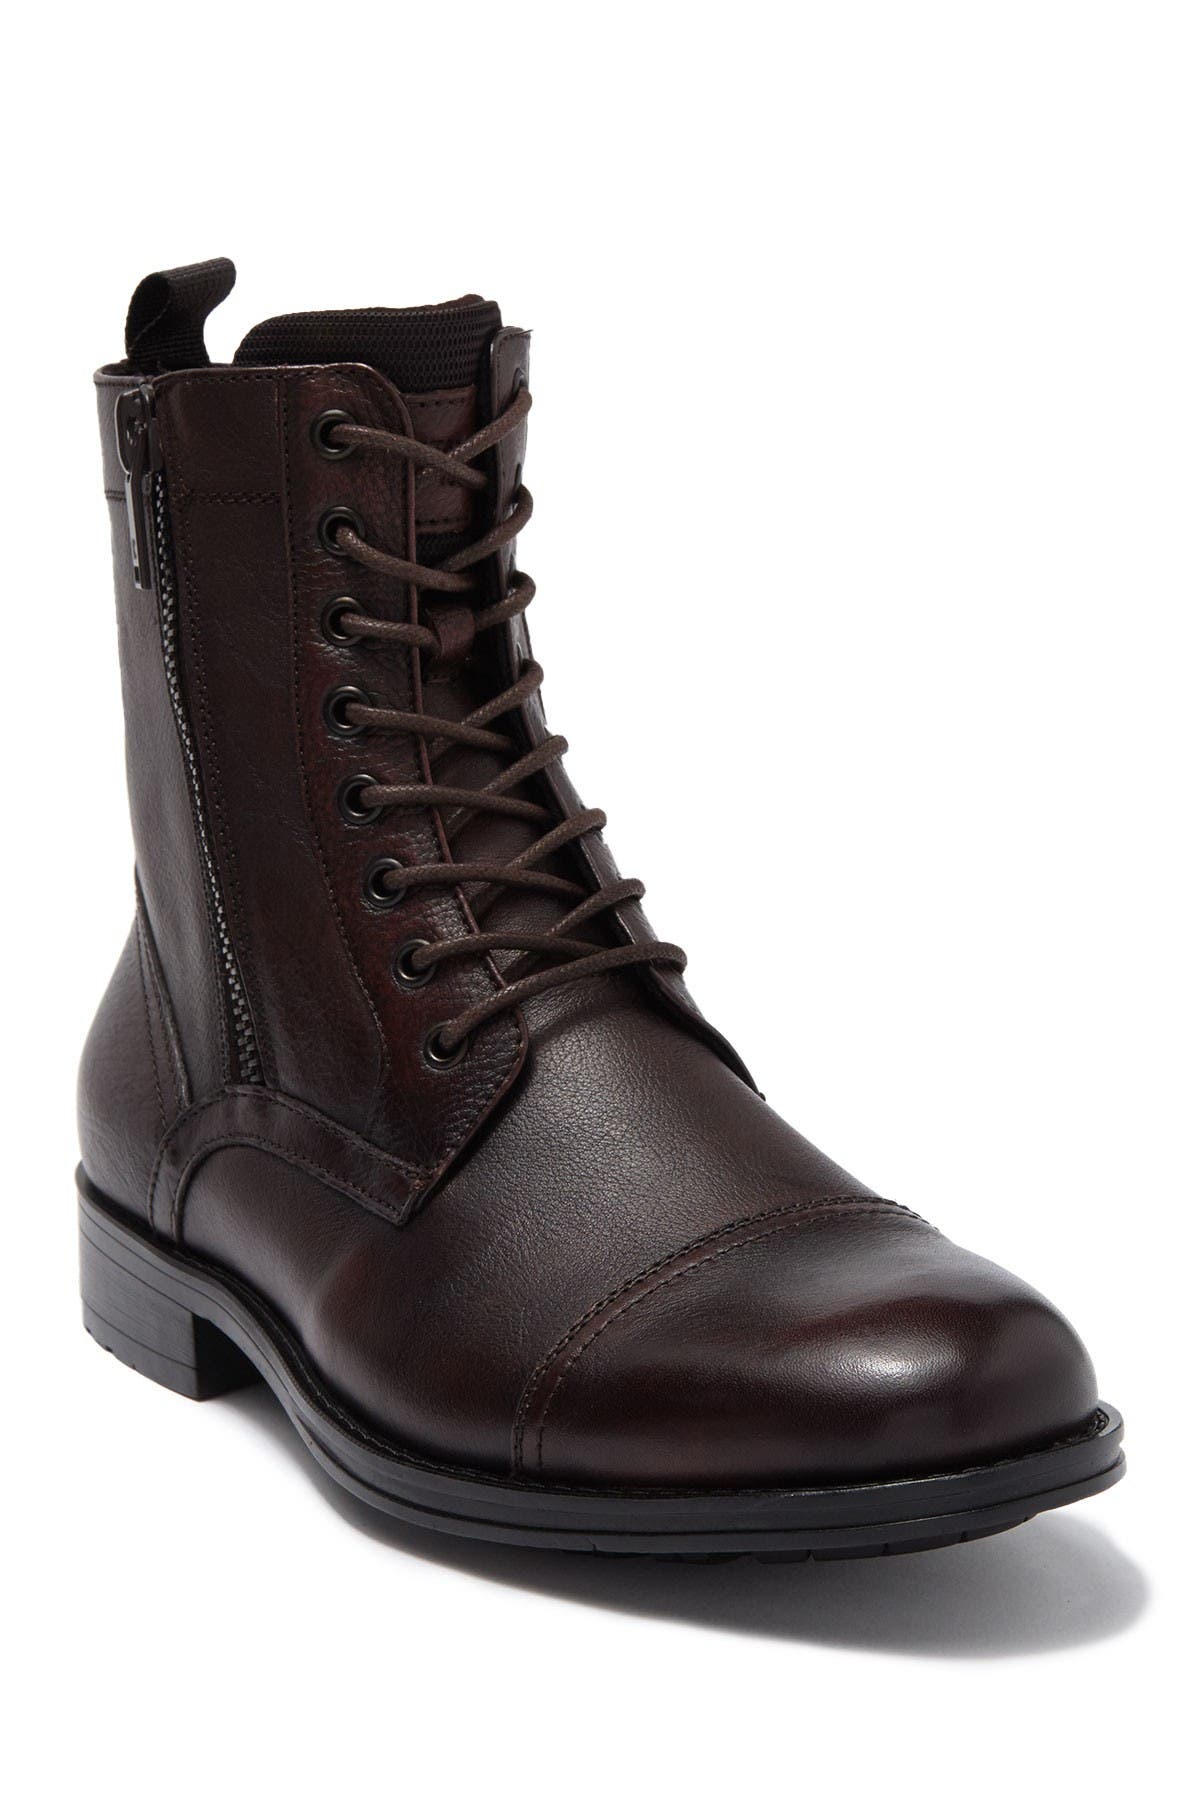 side zip leather boots